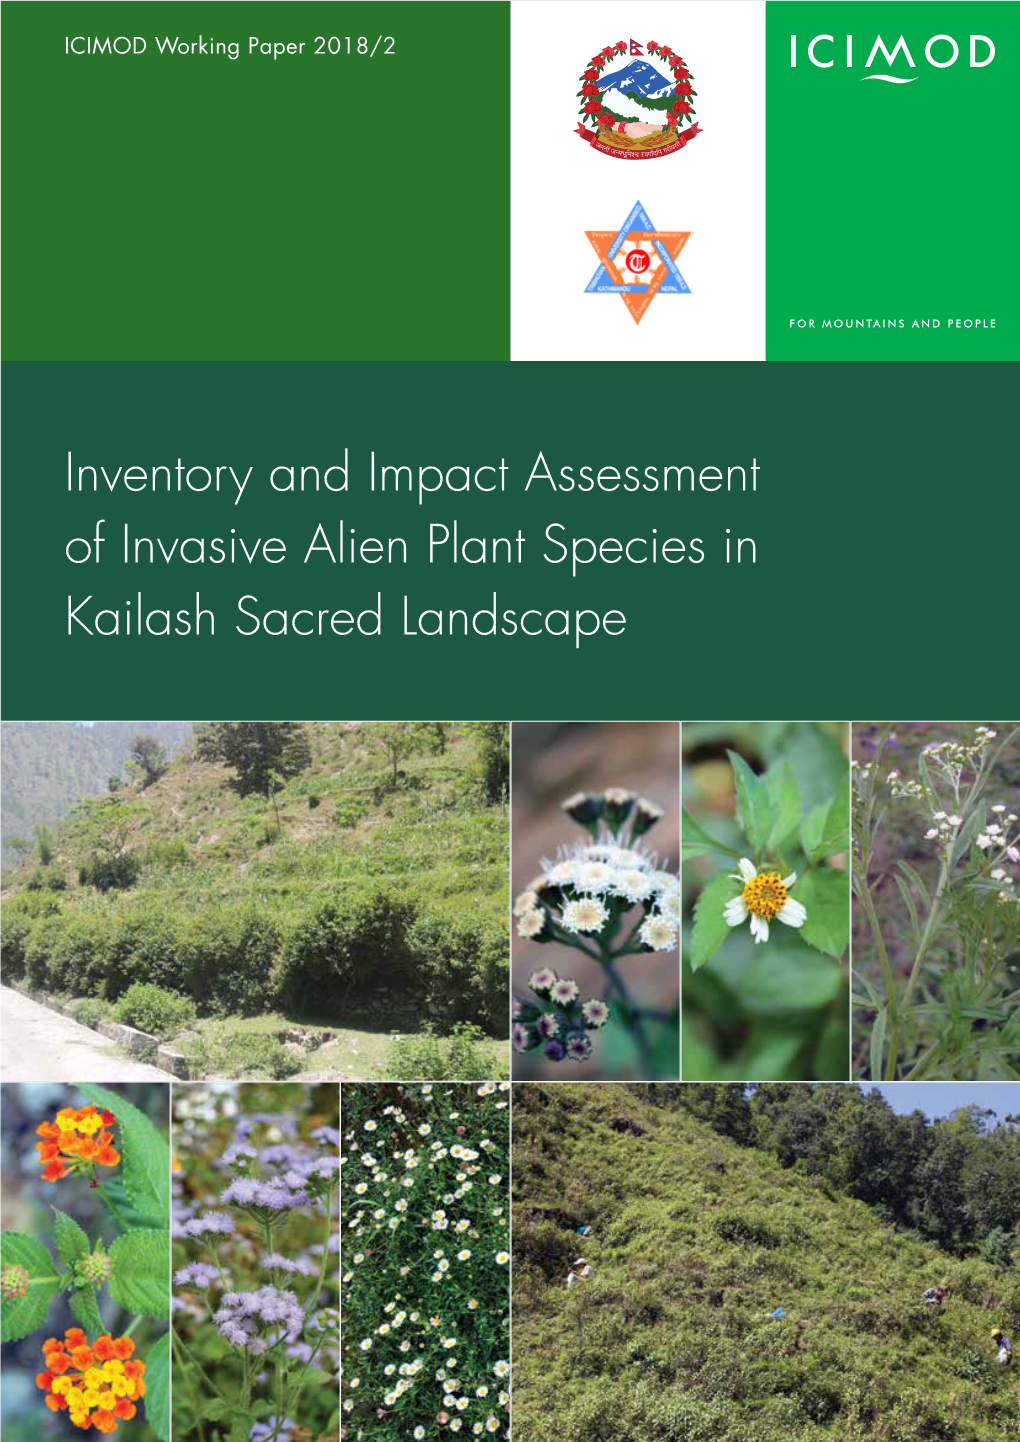 Inventory and Impact Assessment of Invasive Alien Plant Species in Kailash Sacred Landscape